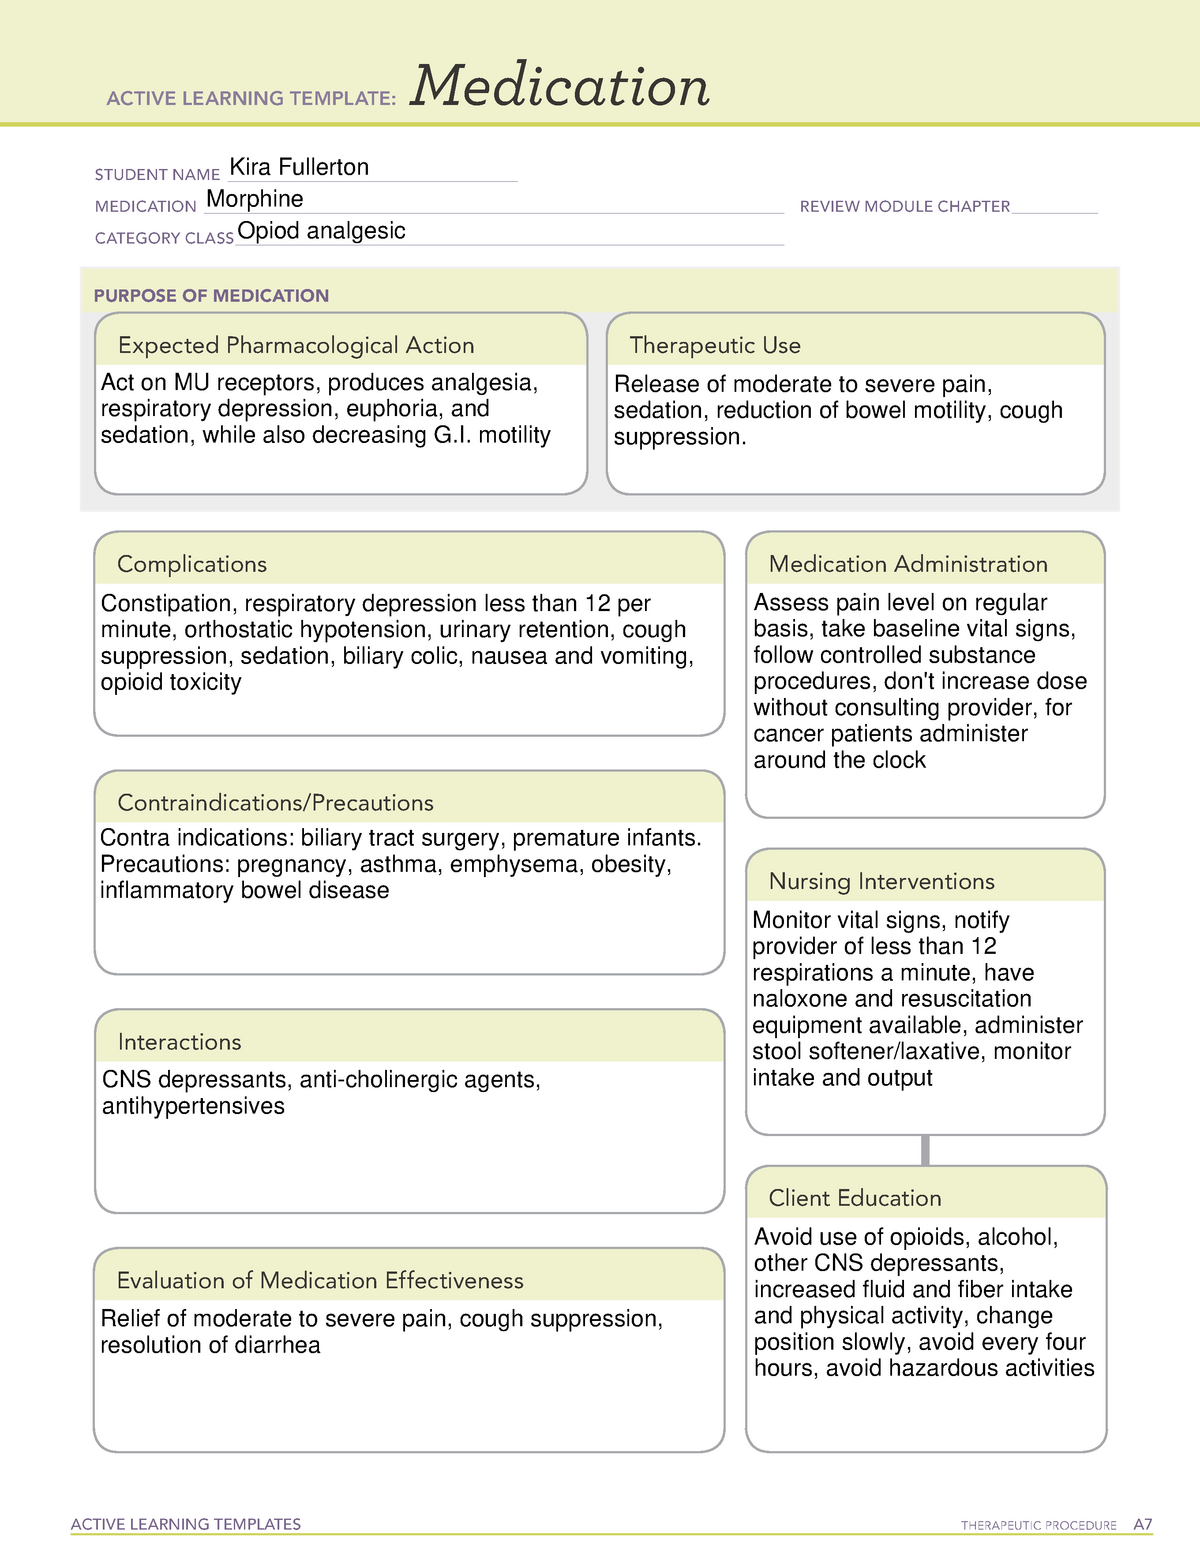 MED Morphine ATI medications sheet ACTIVE LEARNING TEMPLATES